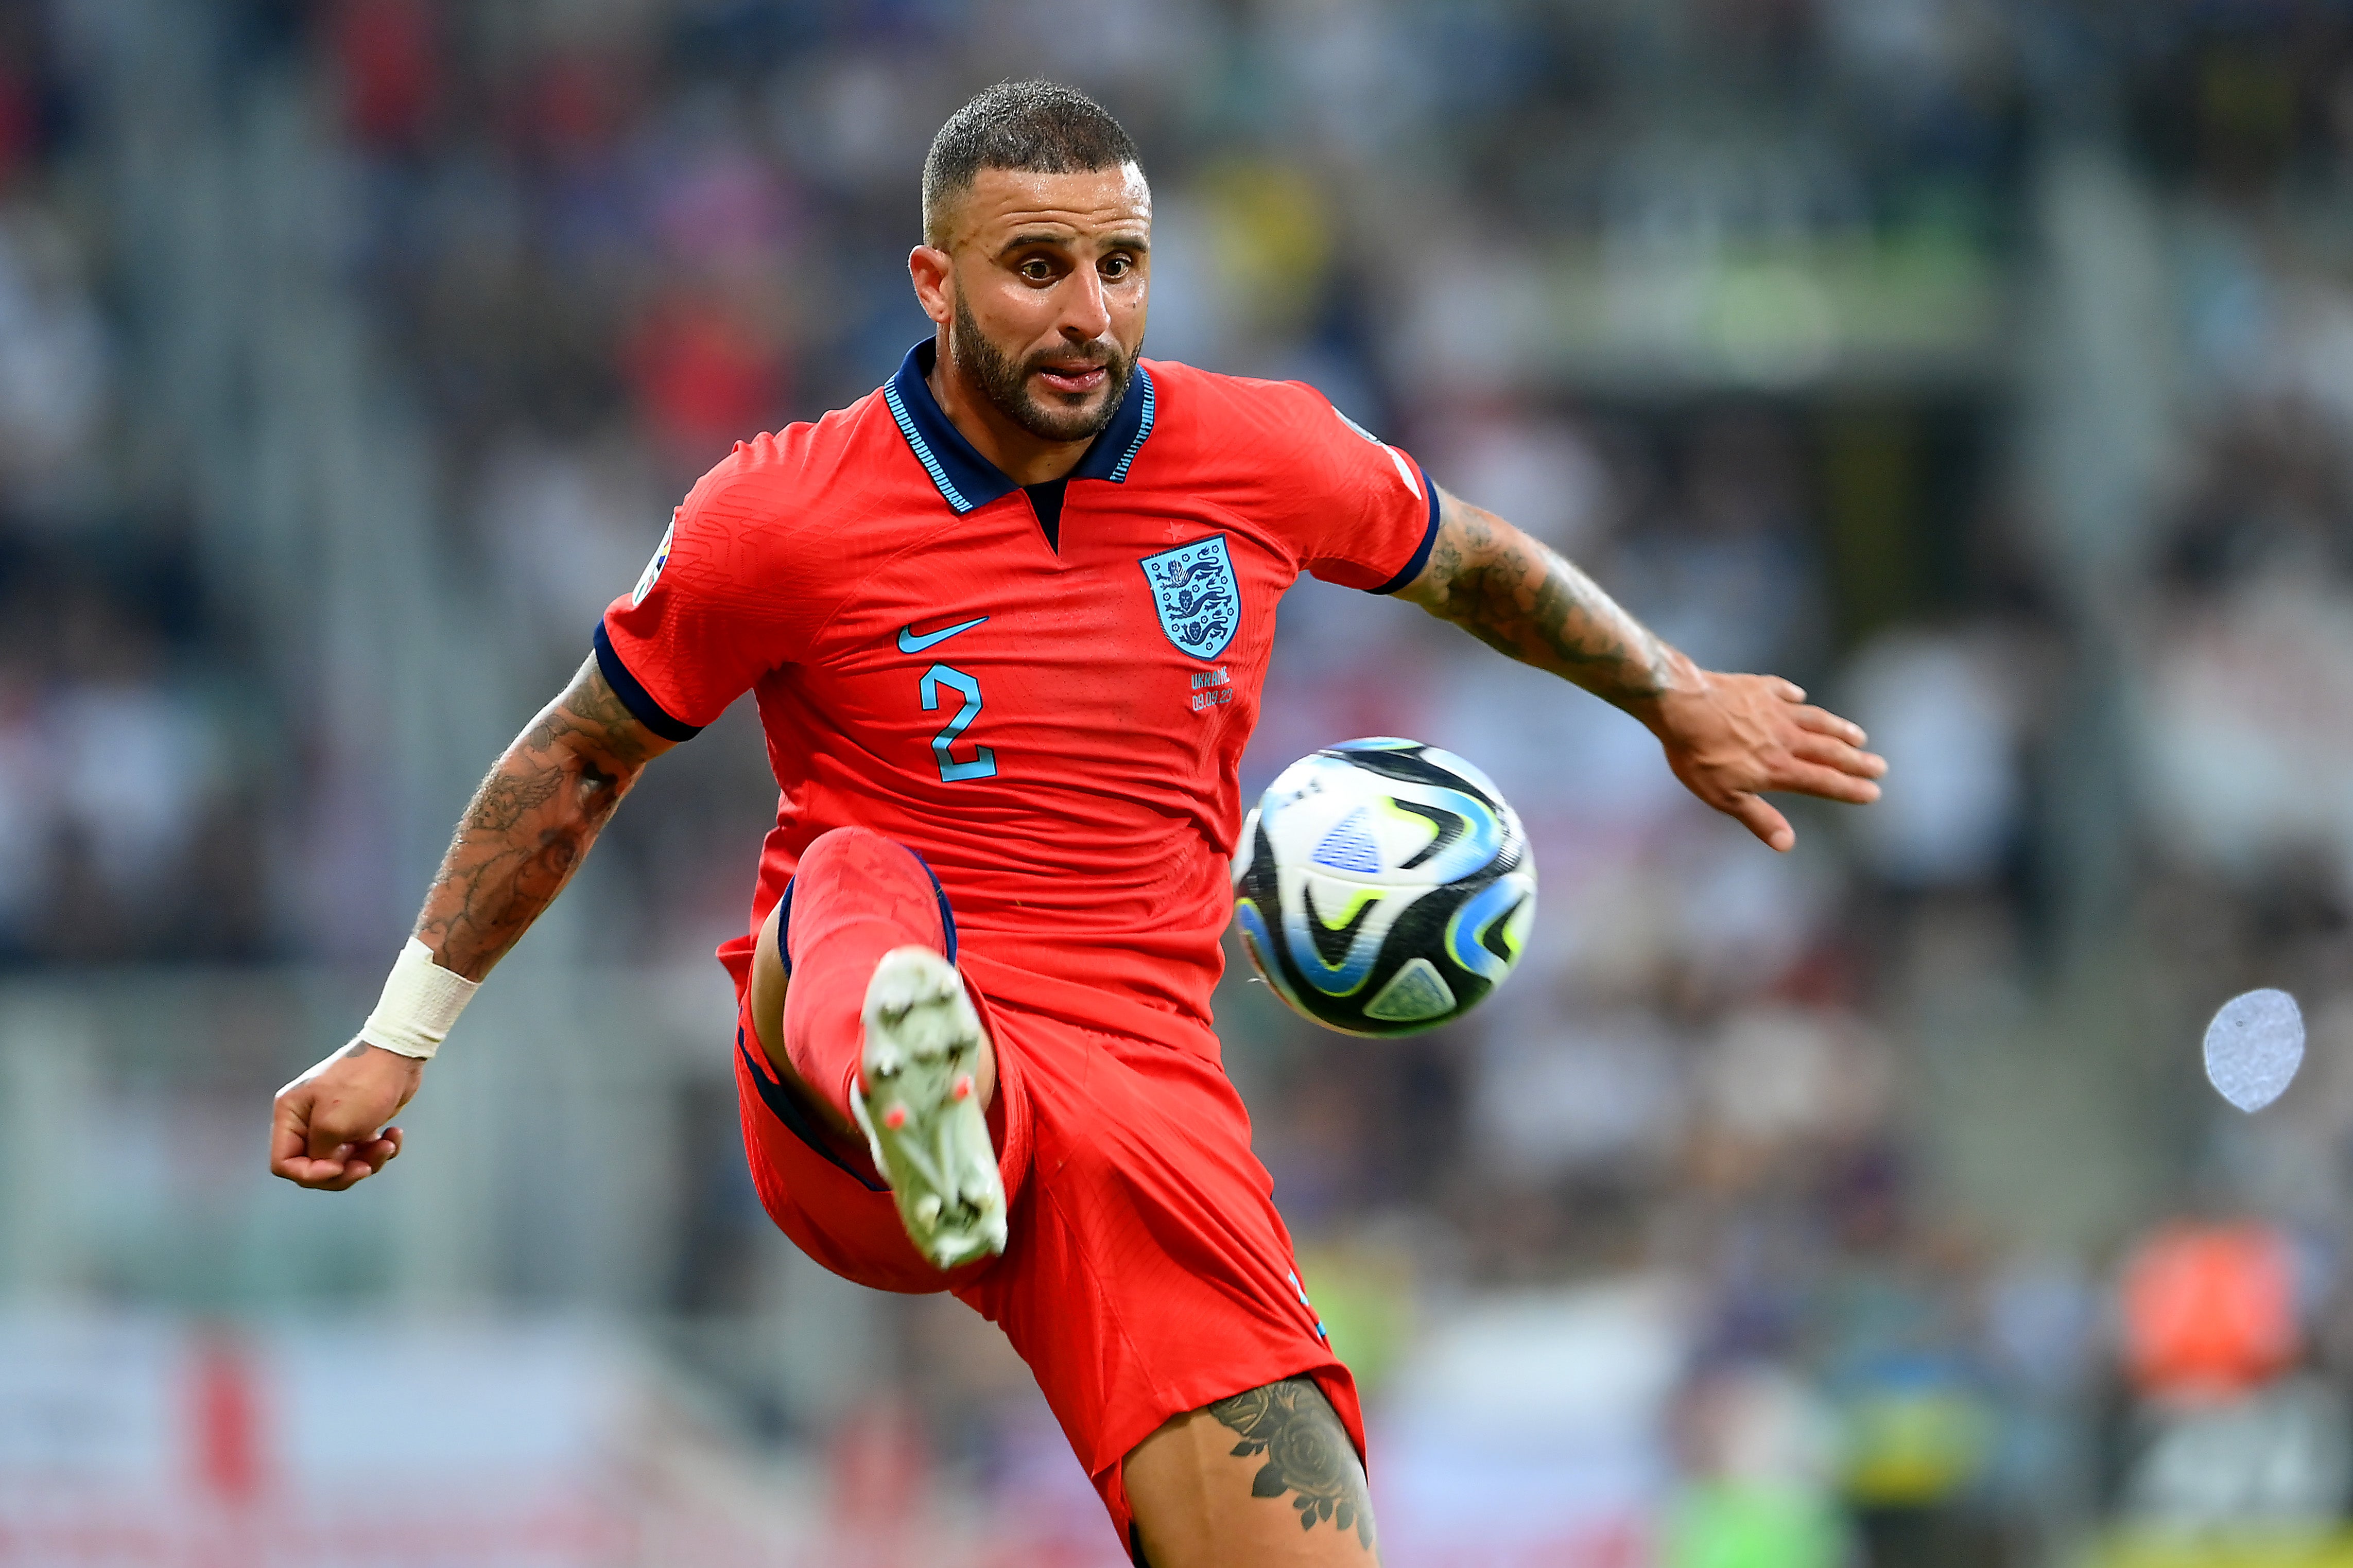 Kyle Walker scored his first international goal in England’s 1-1 draw with Ukraine